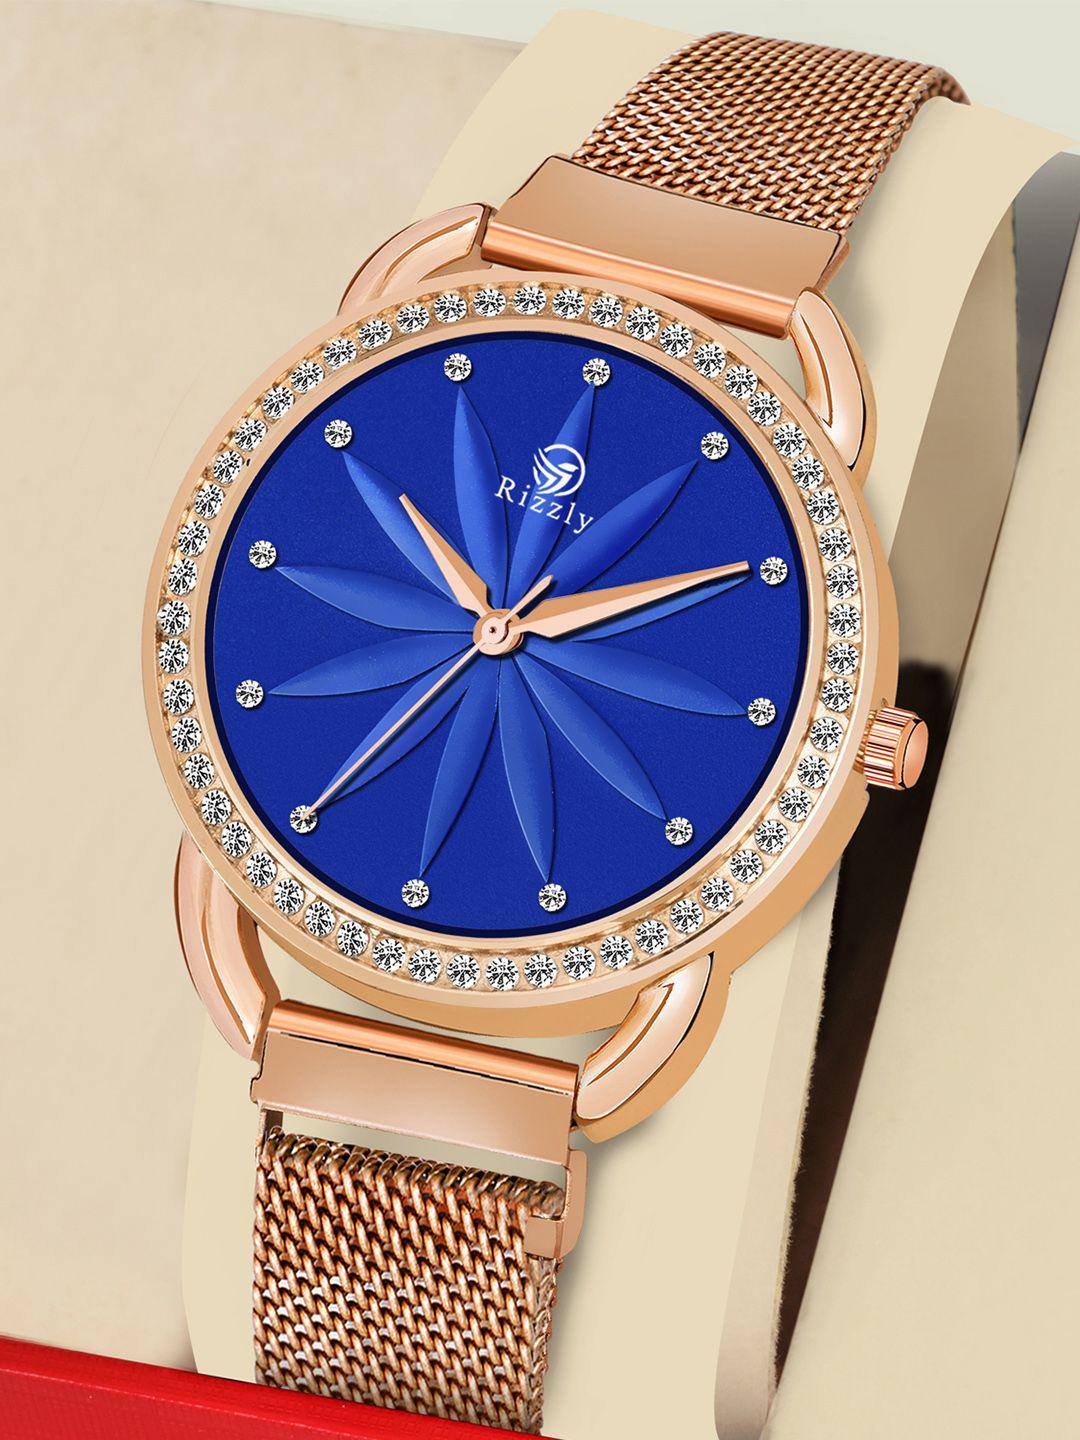 rizzly women blue brass embellished dial rose gold stainless steel analogue watch rz-137